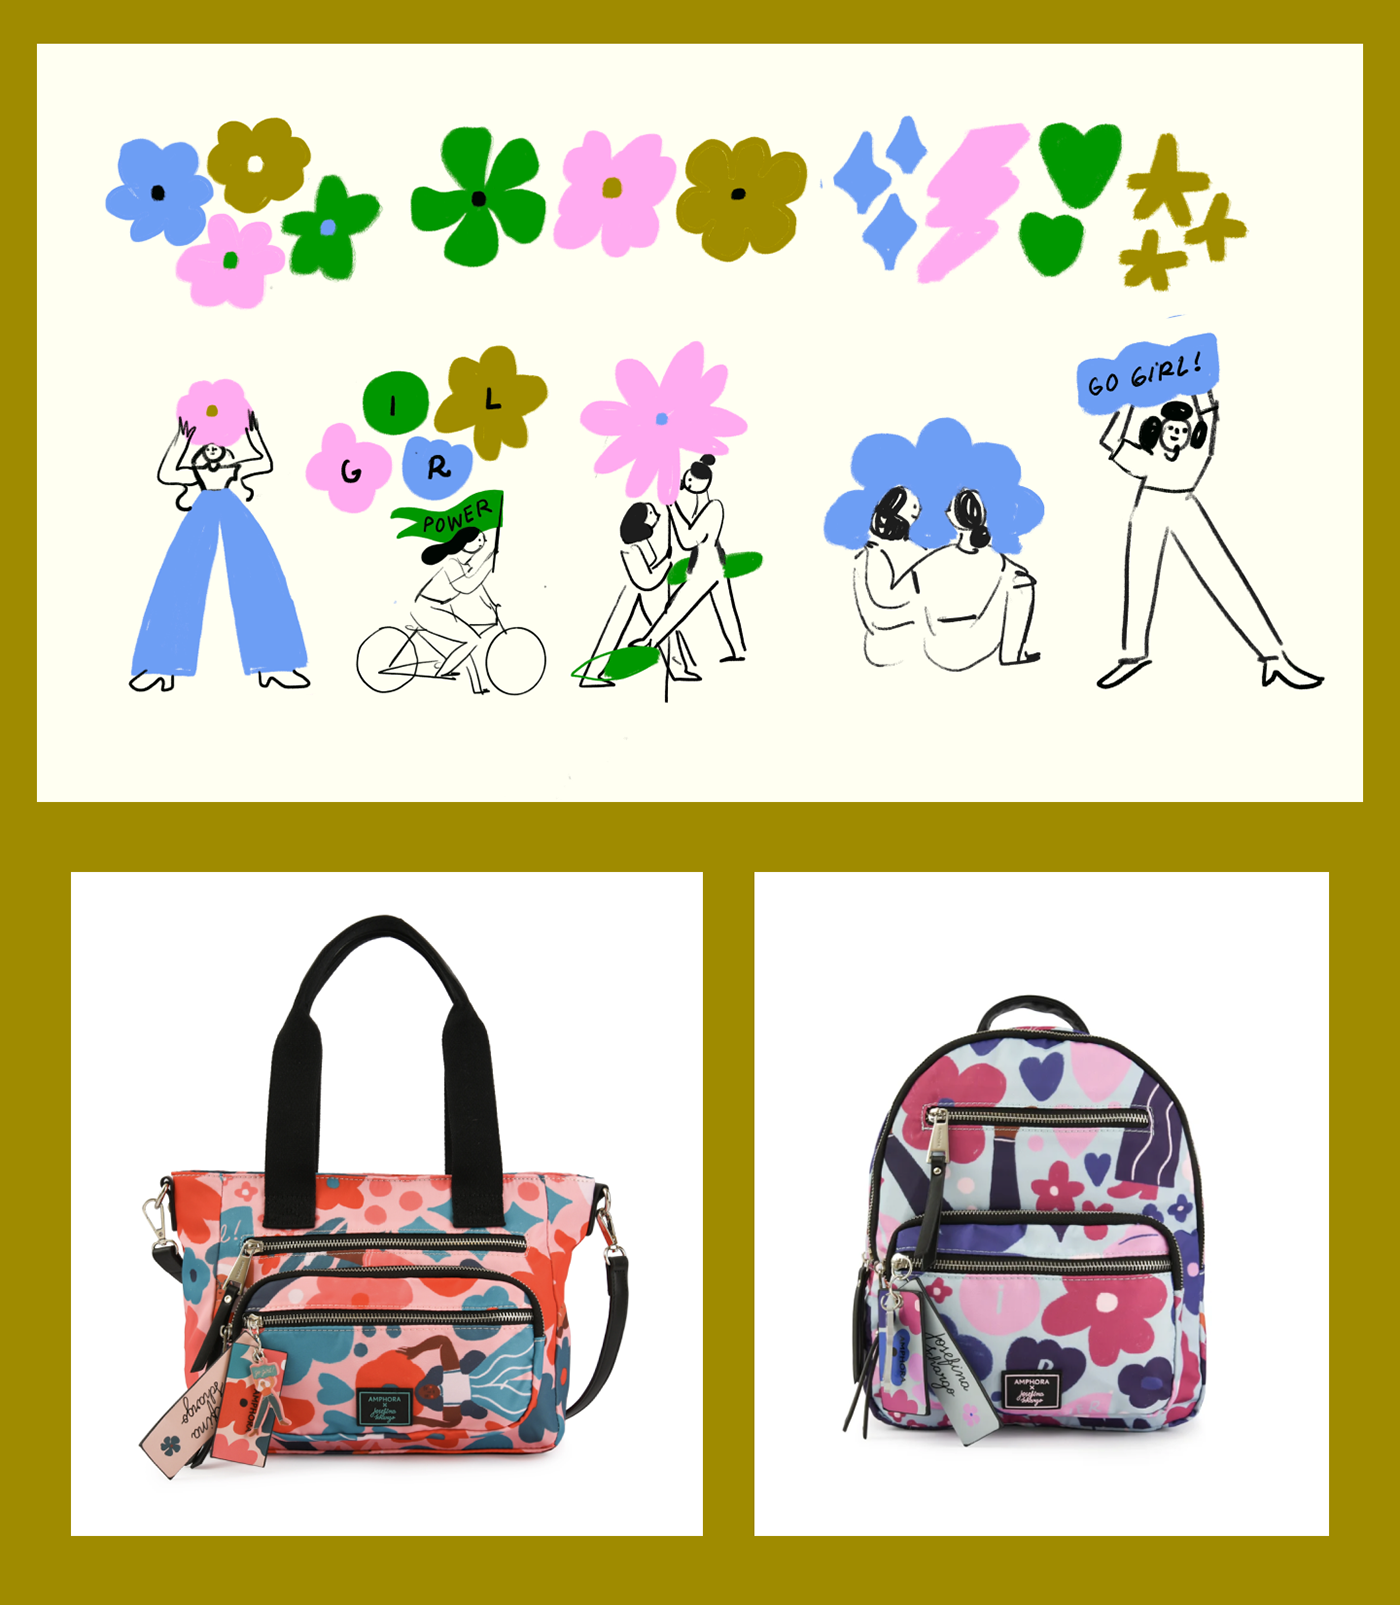 Patterns surface design product Flowers female character fashion design hippie bag design